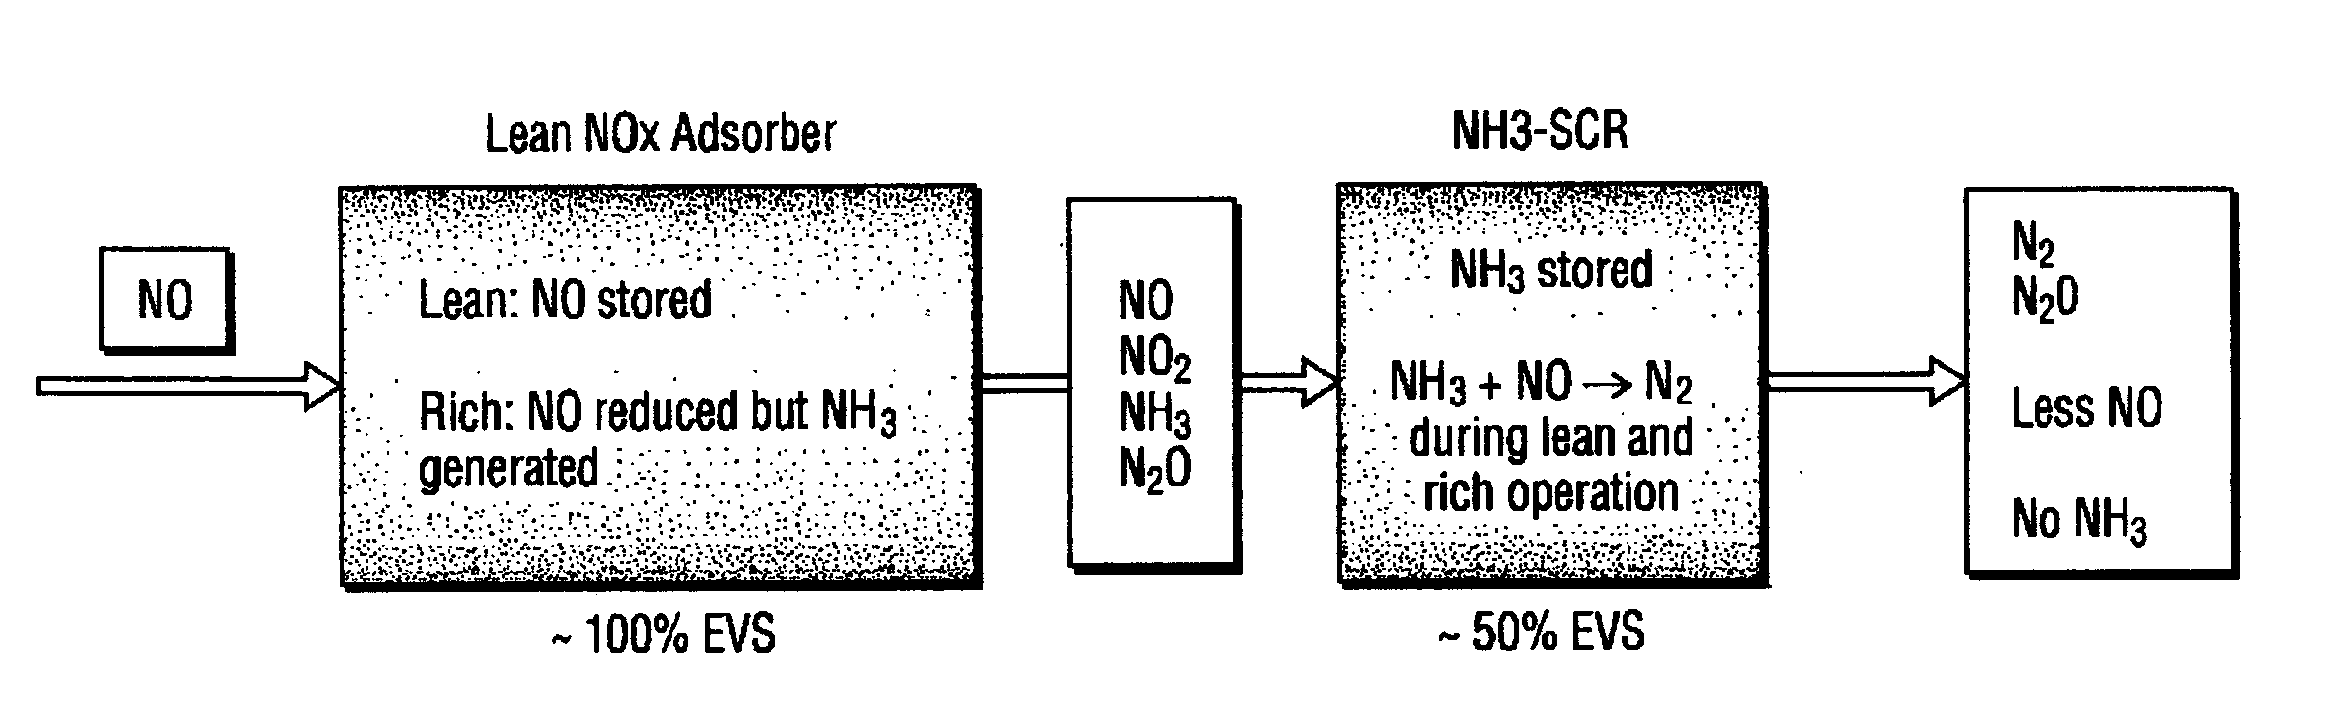 Catalyst System for the Reduction of NOx and NH3 Emissions